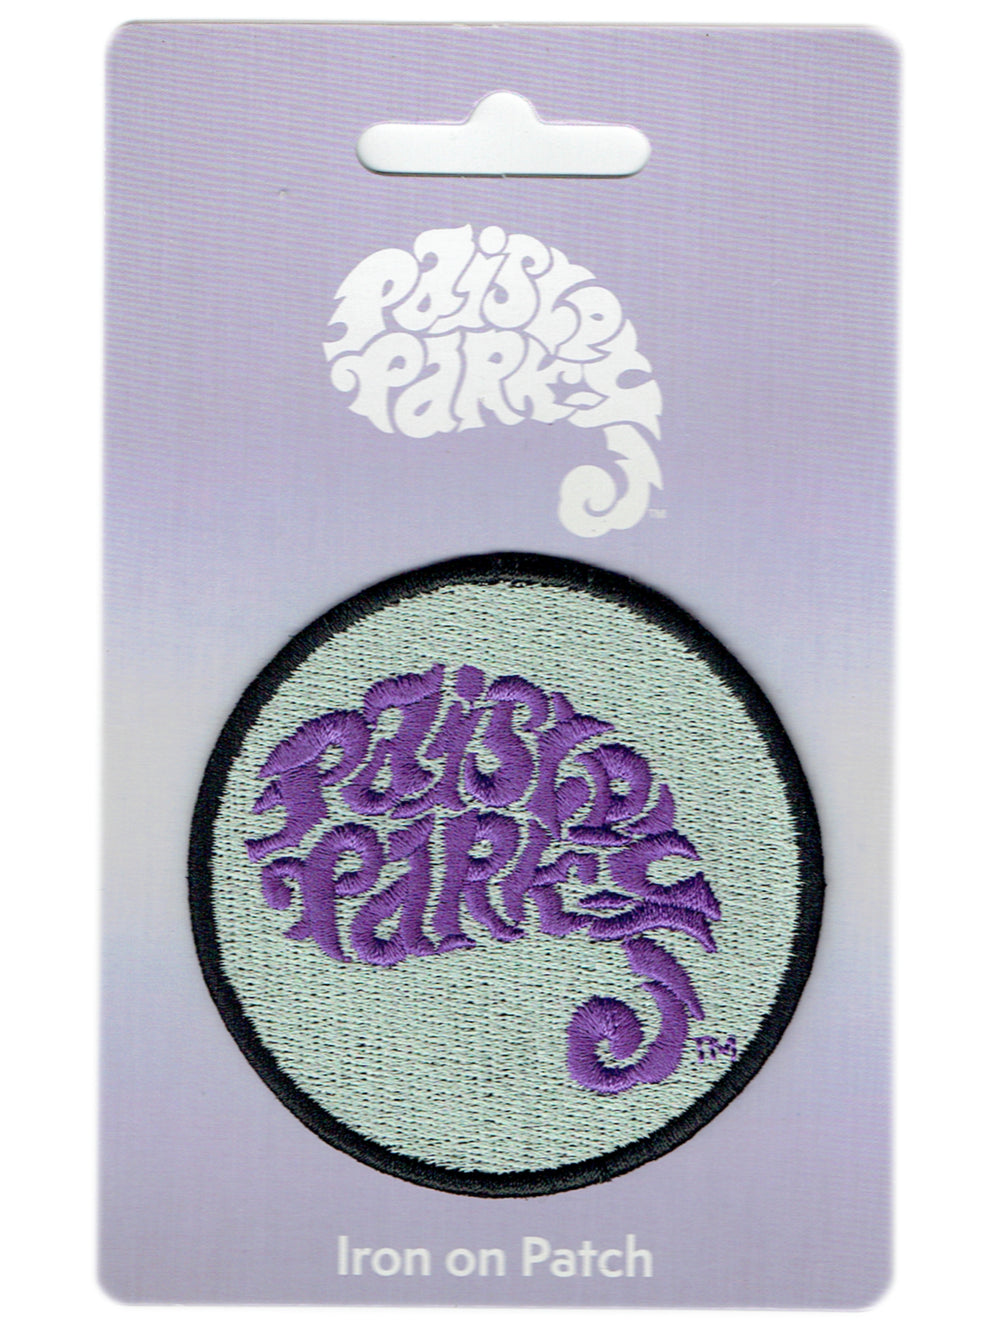 Prince Official Paisley Park Iron On Patch Brand New Logo Round